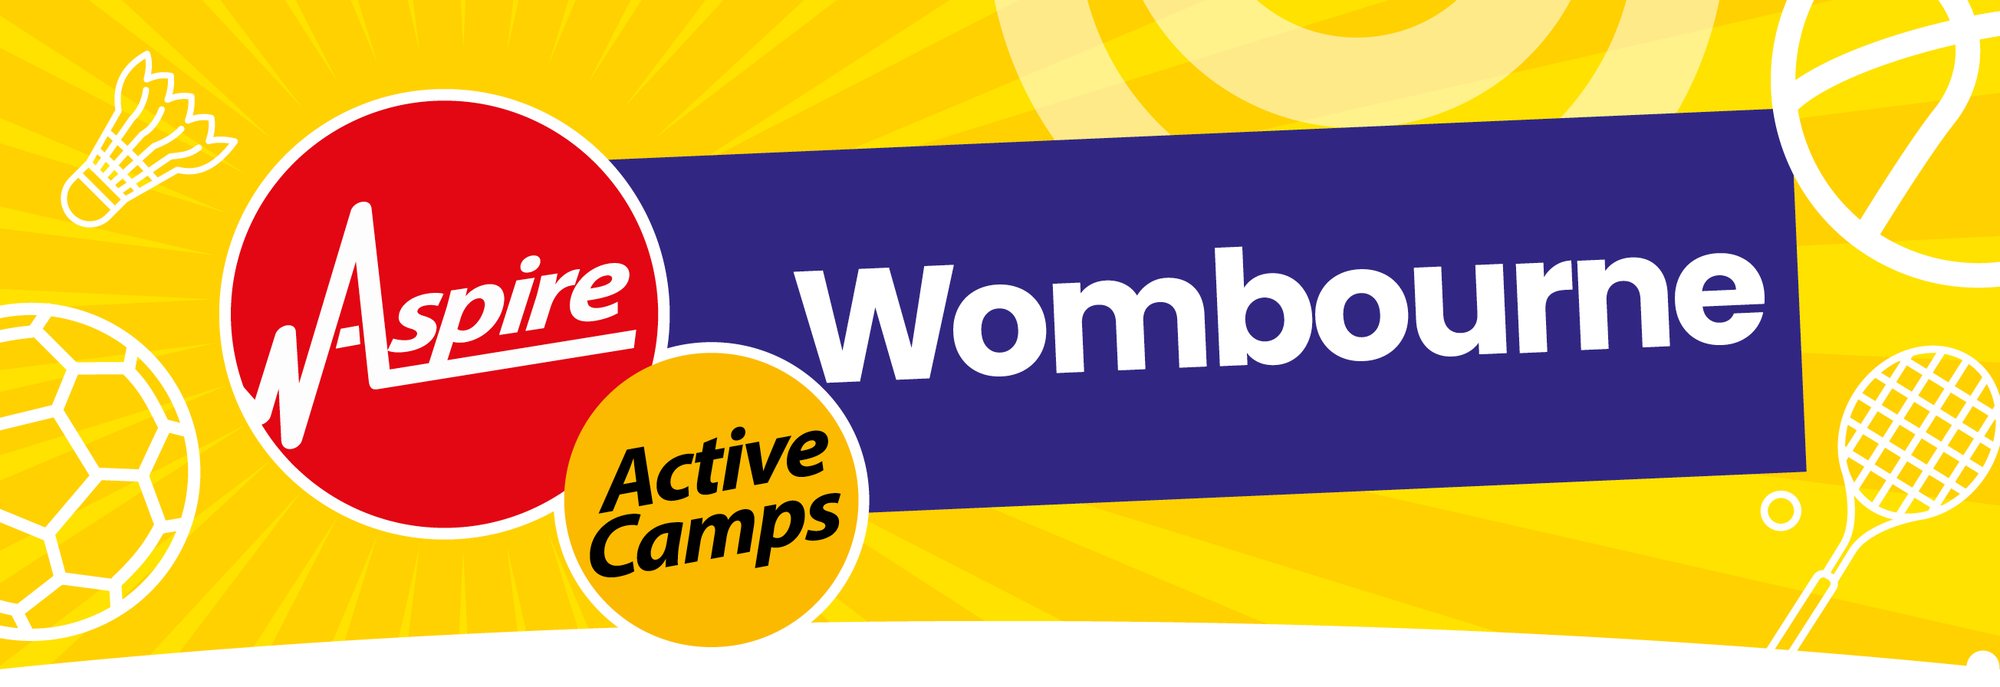 Camp-Wombourne-MOB